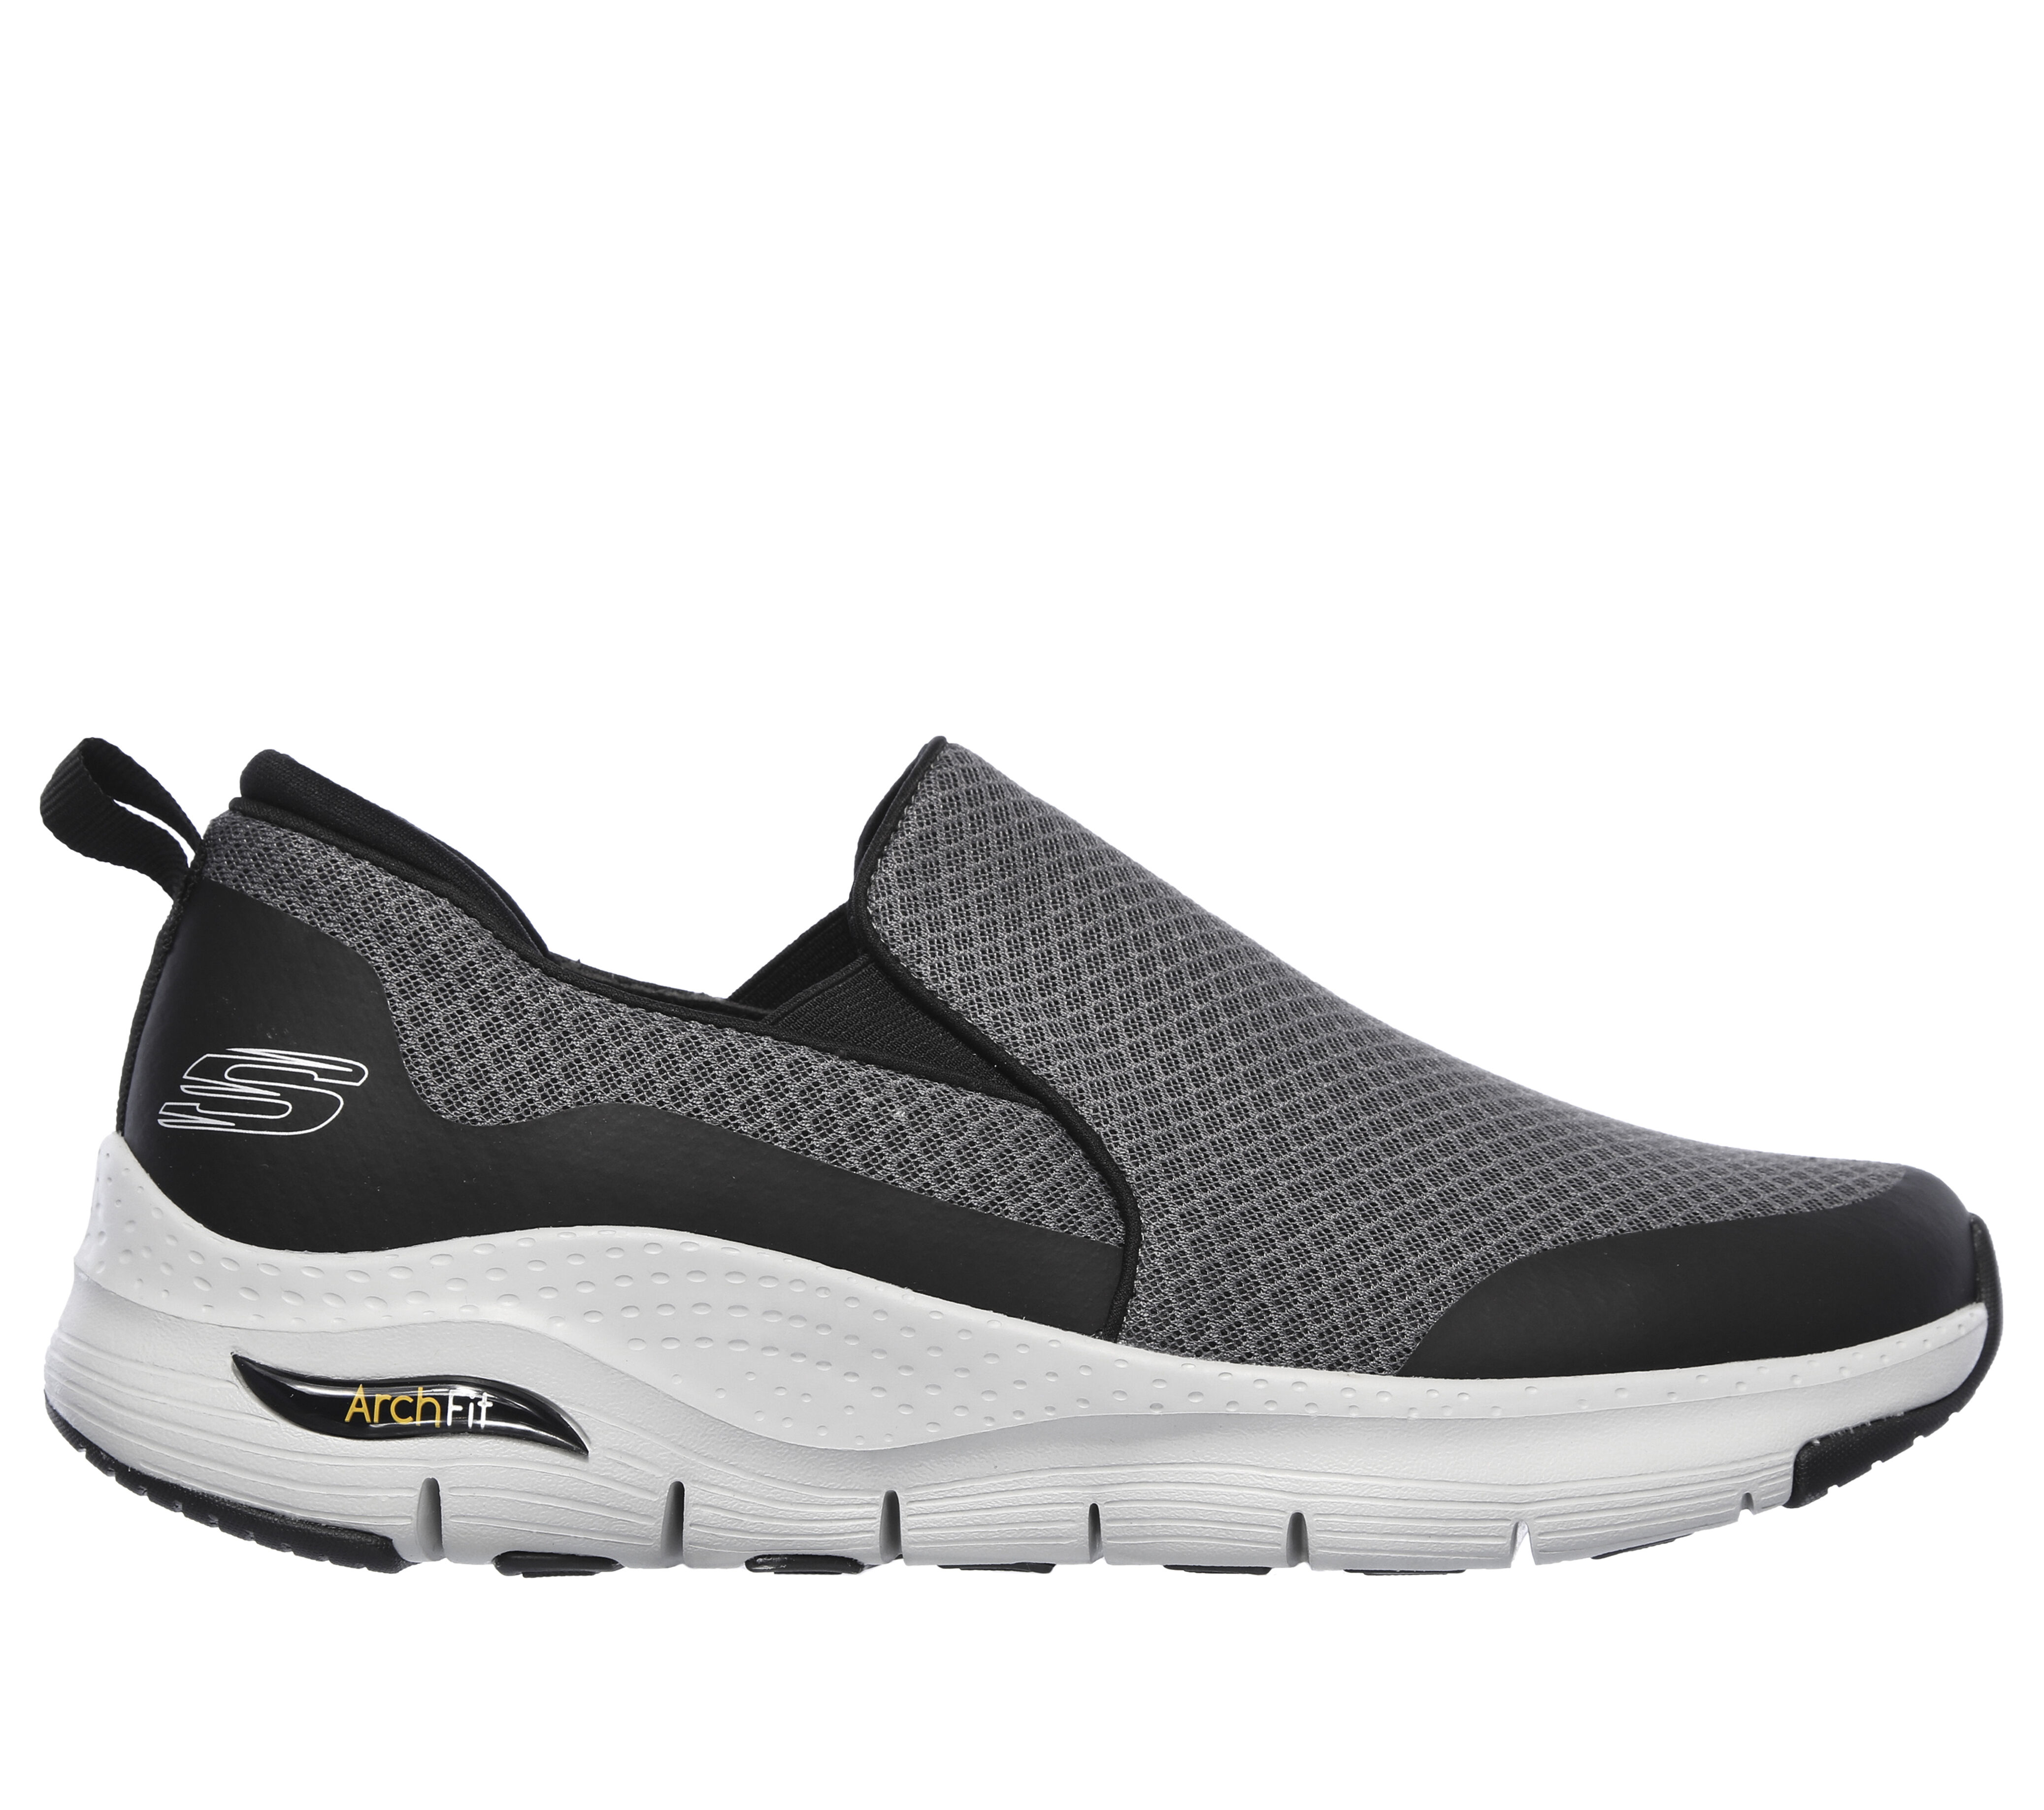 skechers extra wide shoes